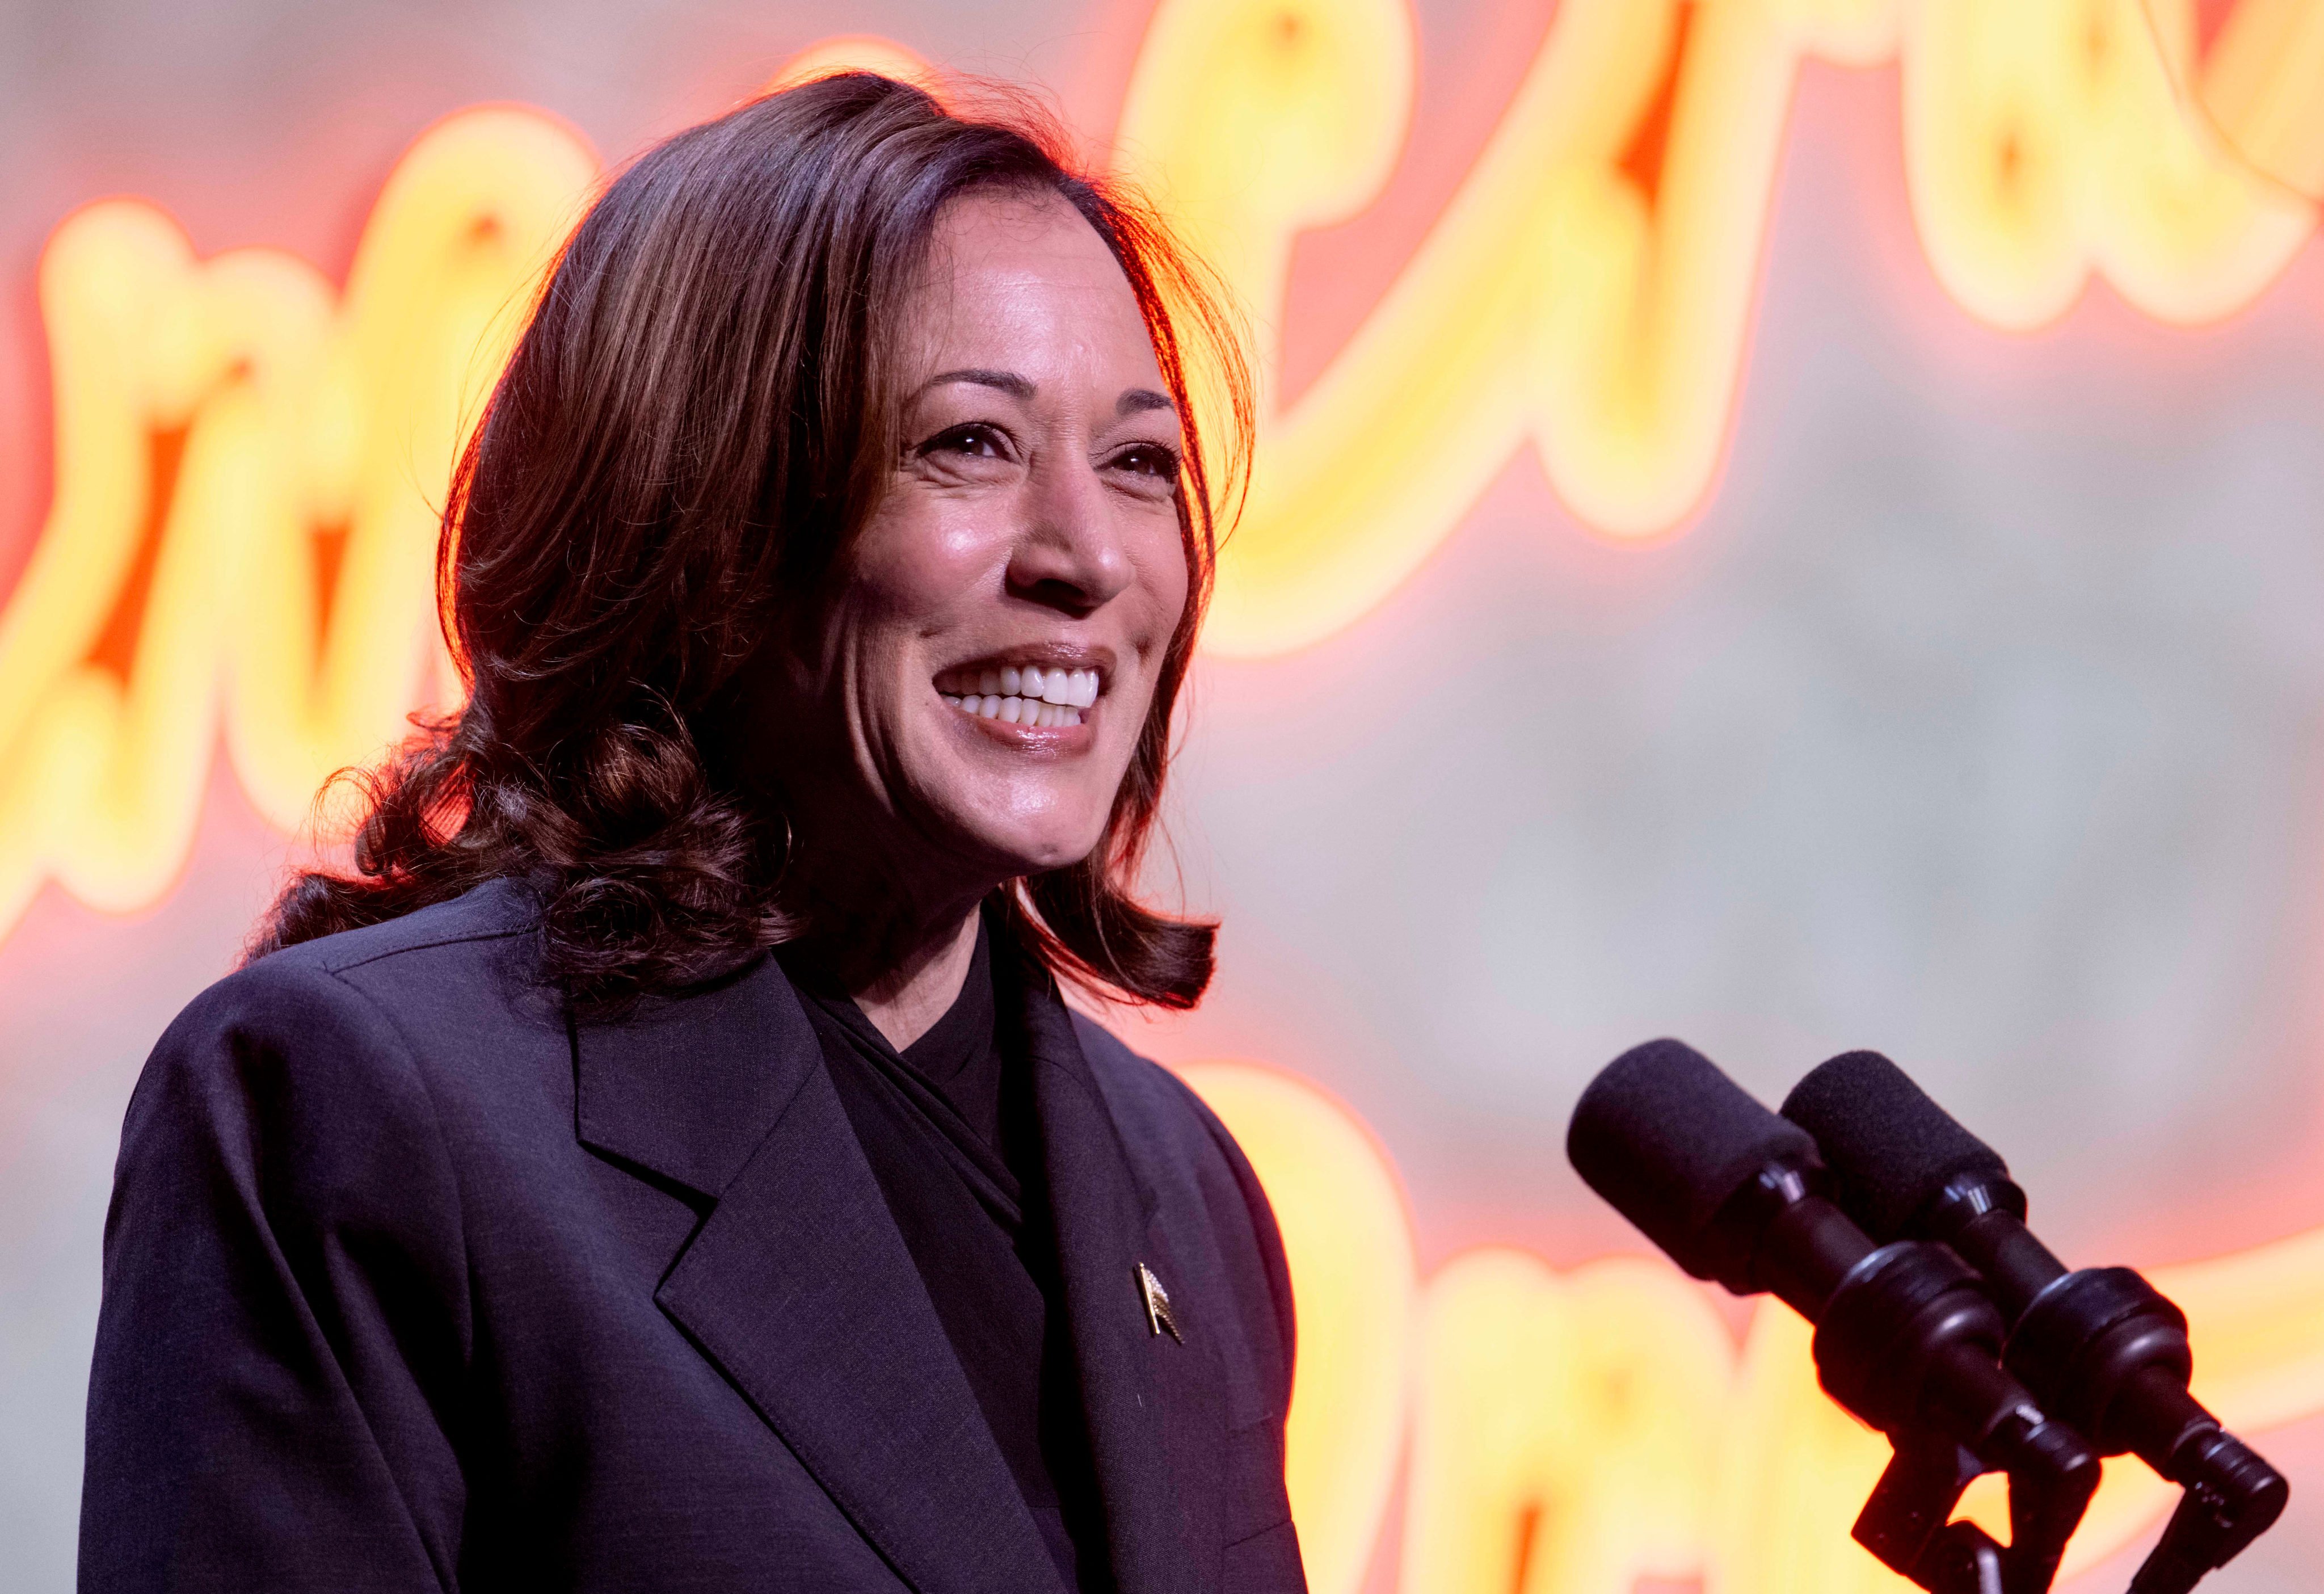 US Vice-President Kamala Harris speaks at an event in Washington in May. Photo: dpa